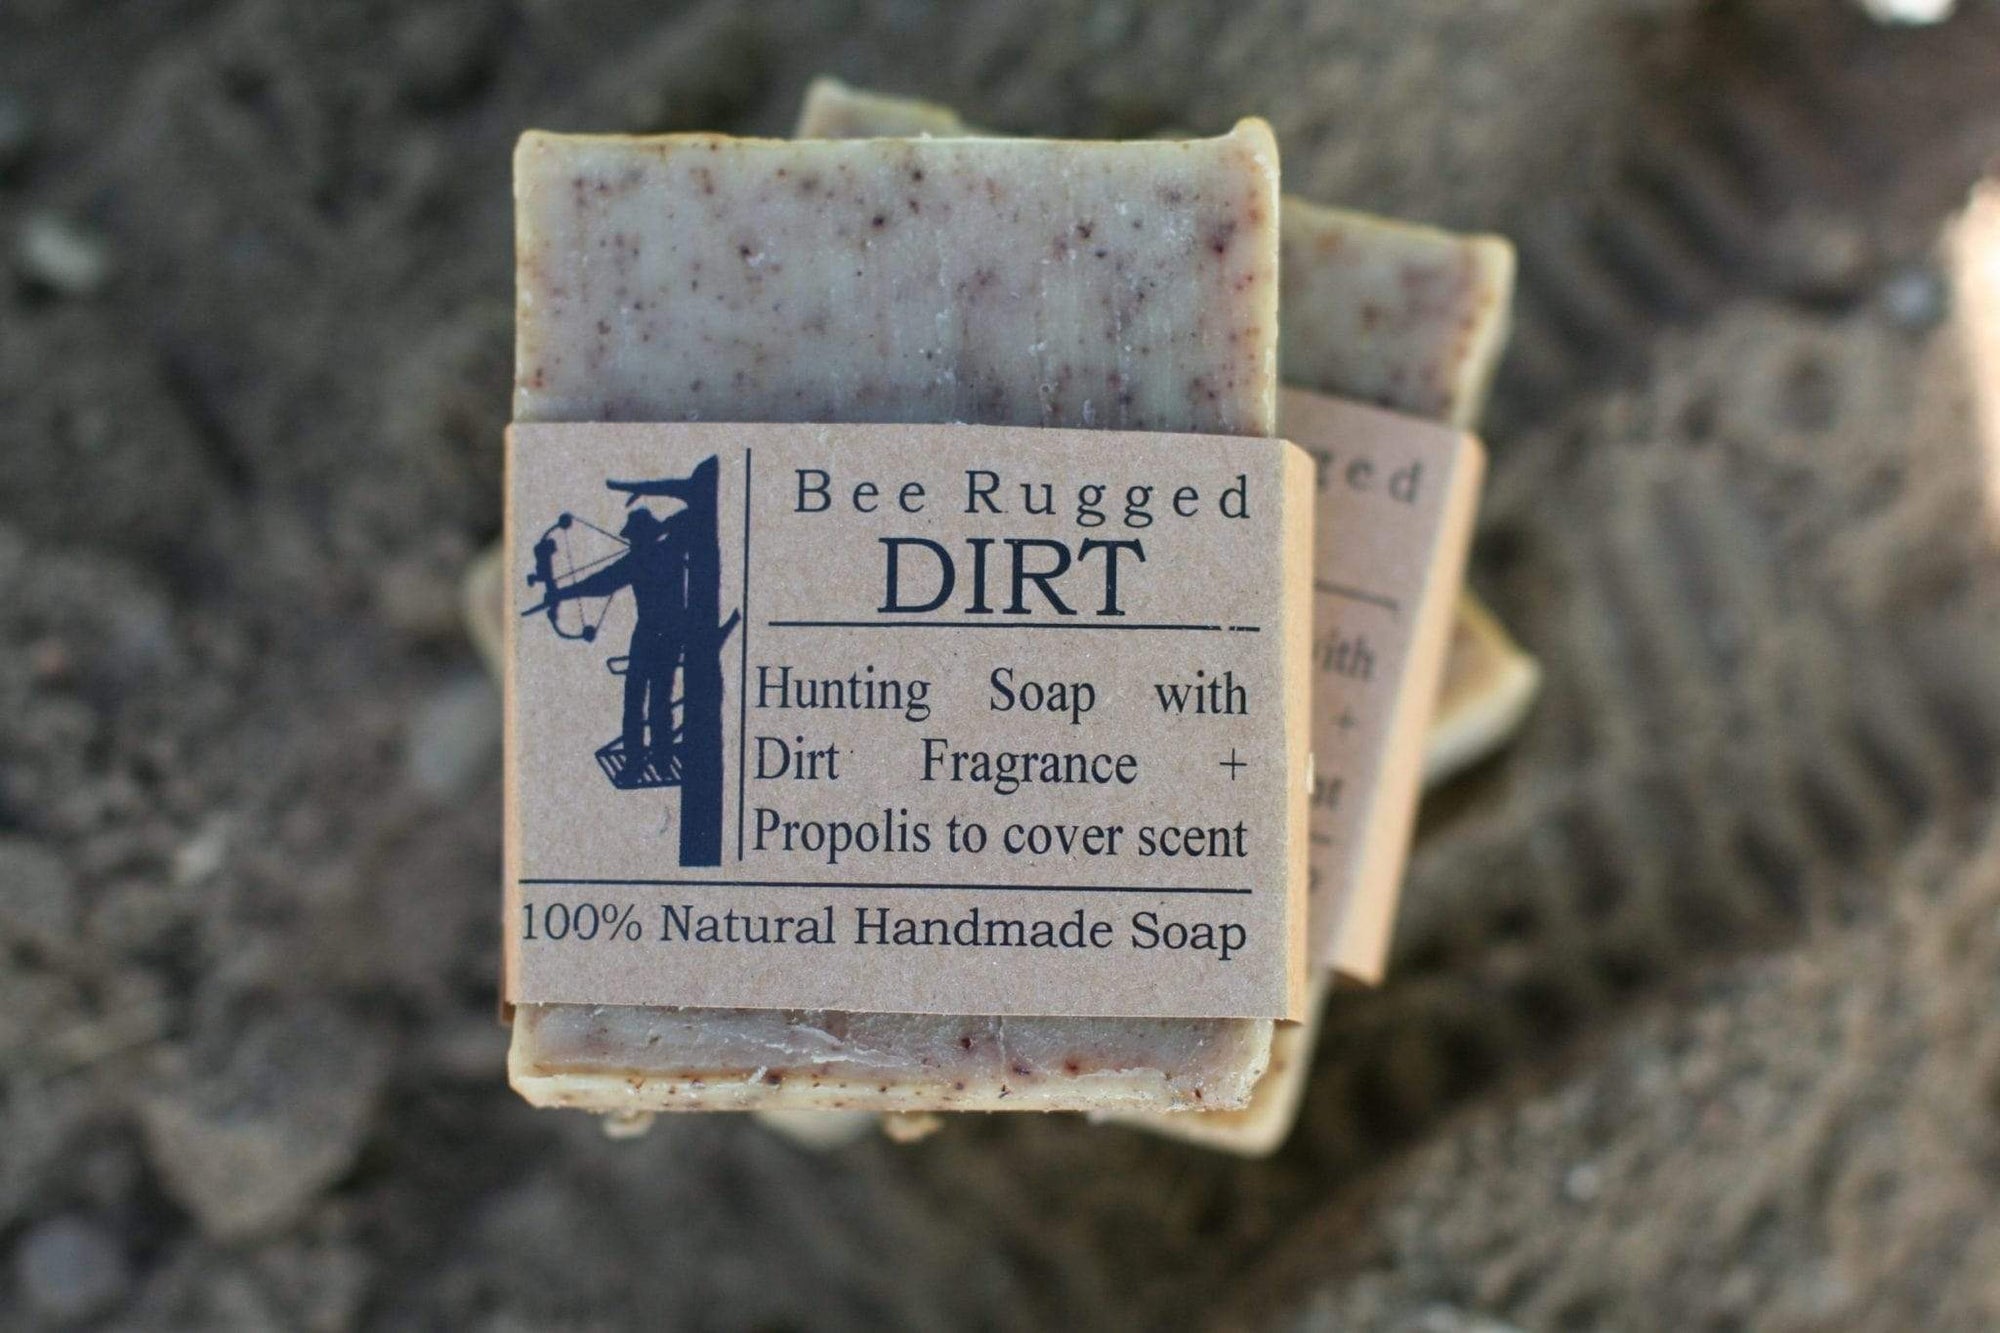 Bee Rugged Dirt Cover Scent Hunting Soap by Bee Lovely Botanicals